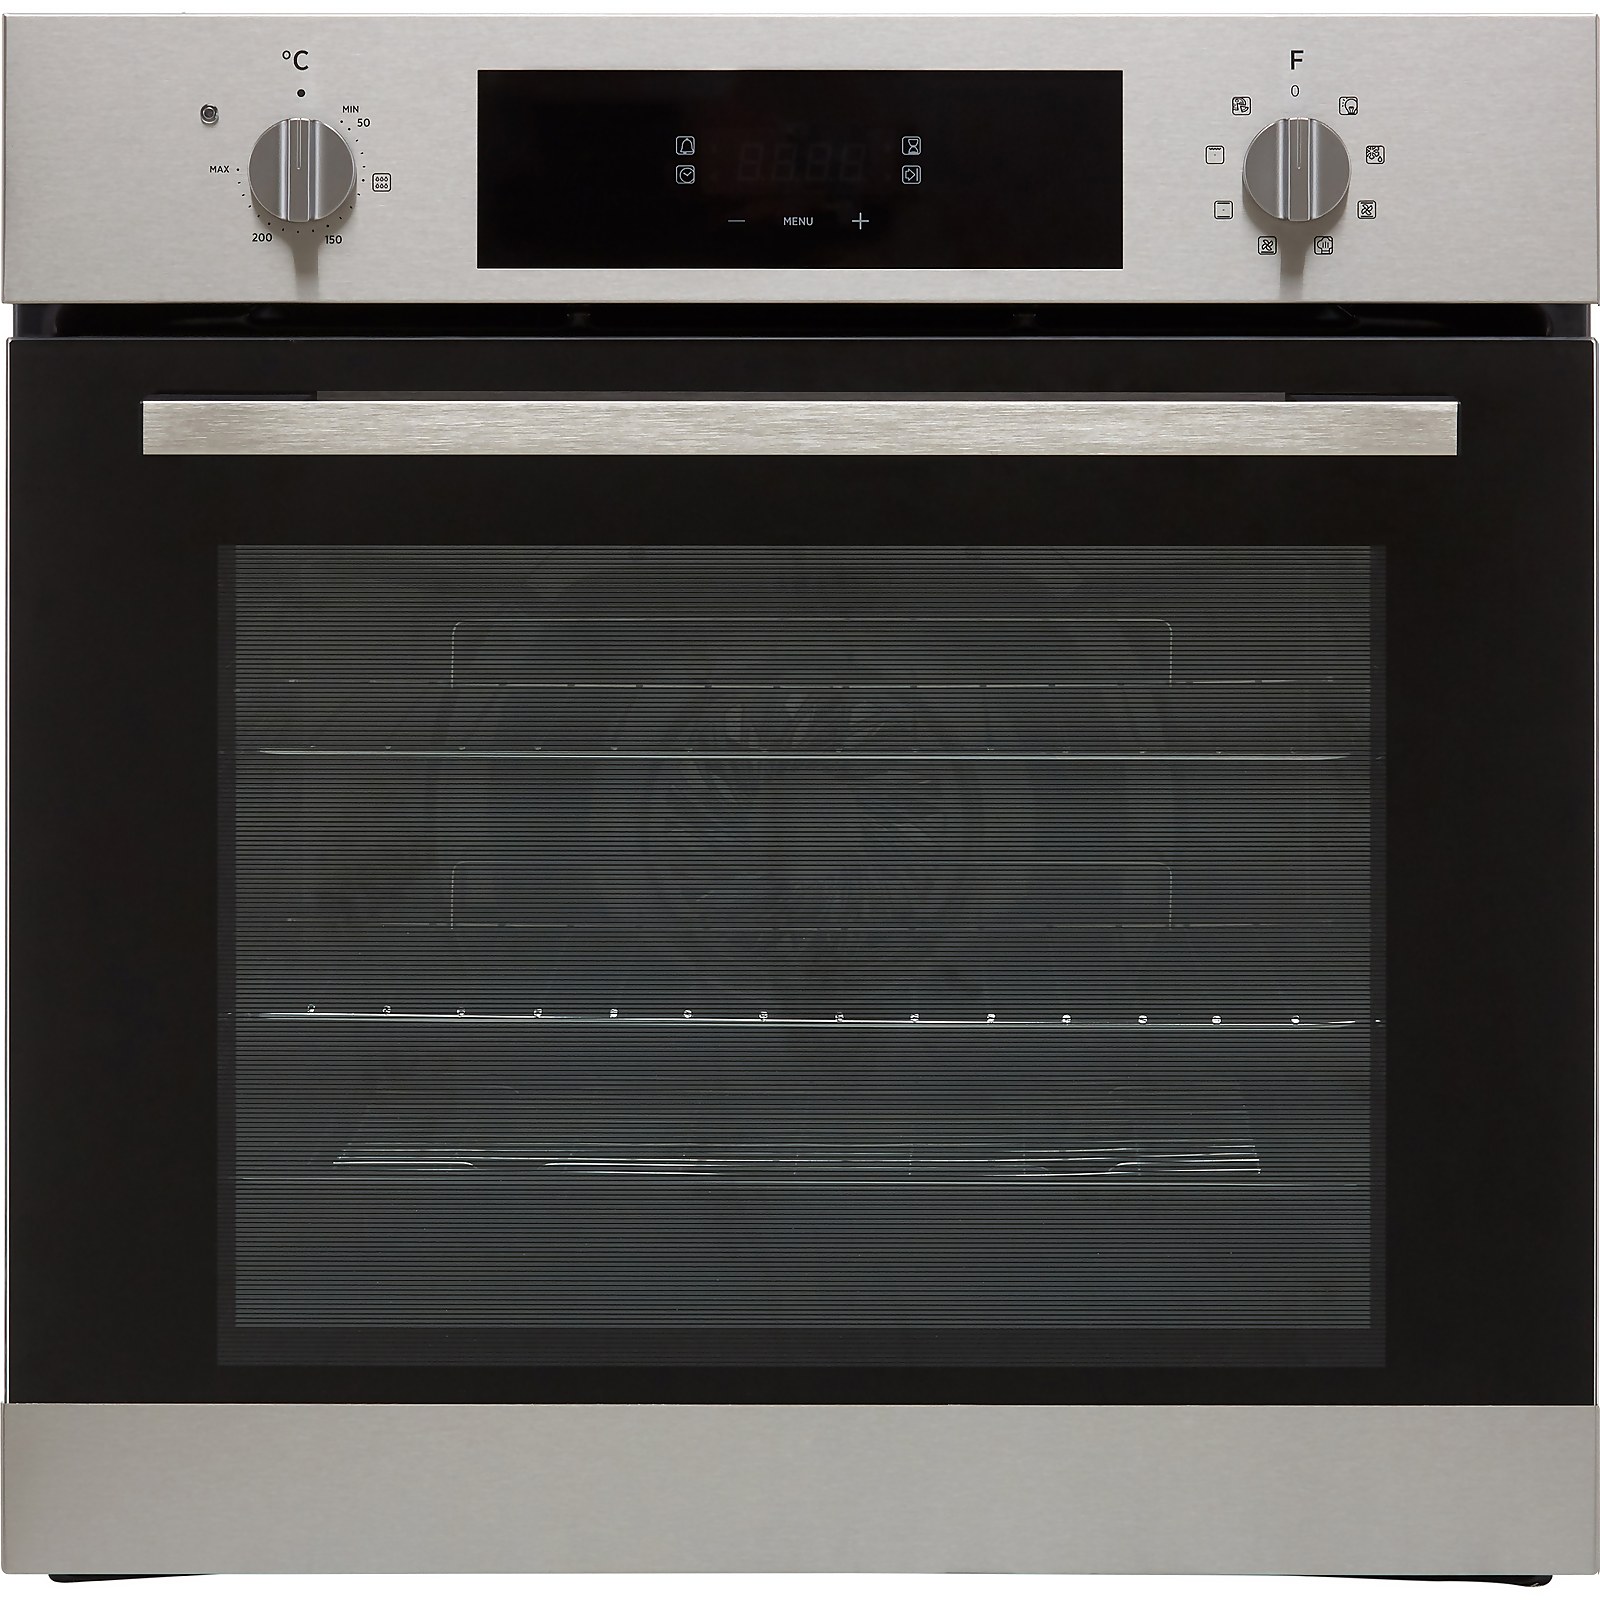 Photo of Hoover H-oven 300 Hoc3bf3058in Built In Electric Single Oven - Stainless Steel